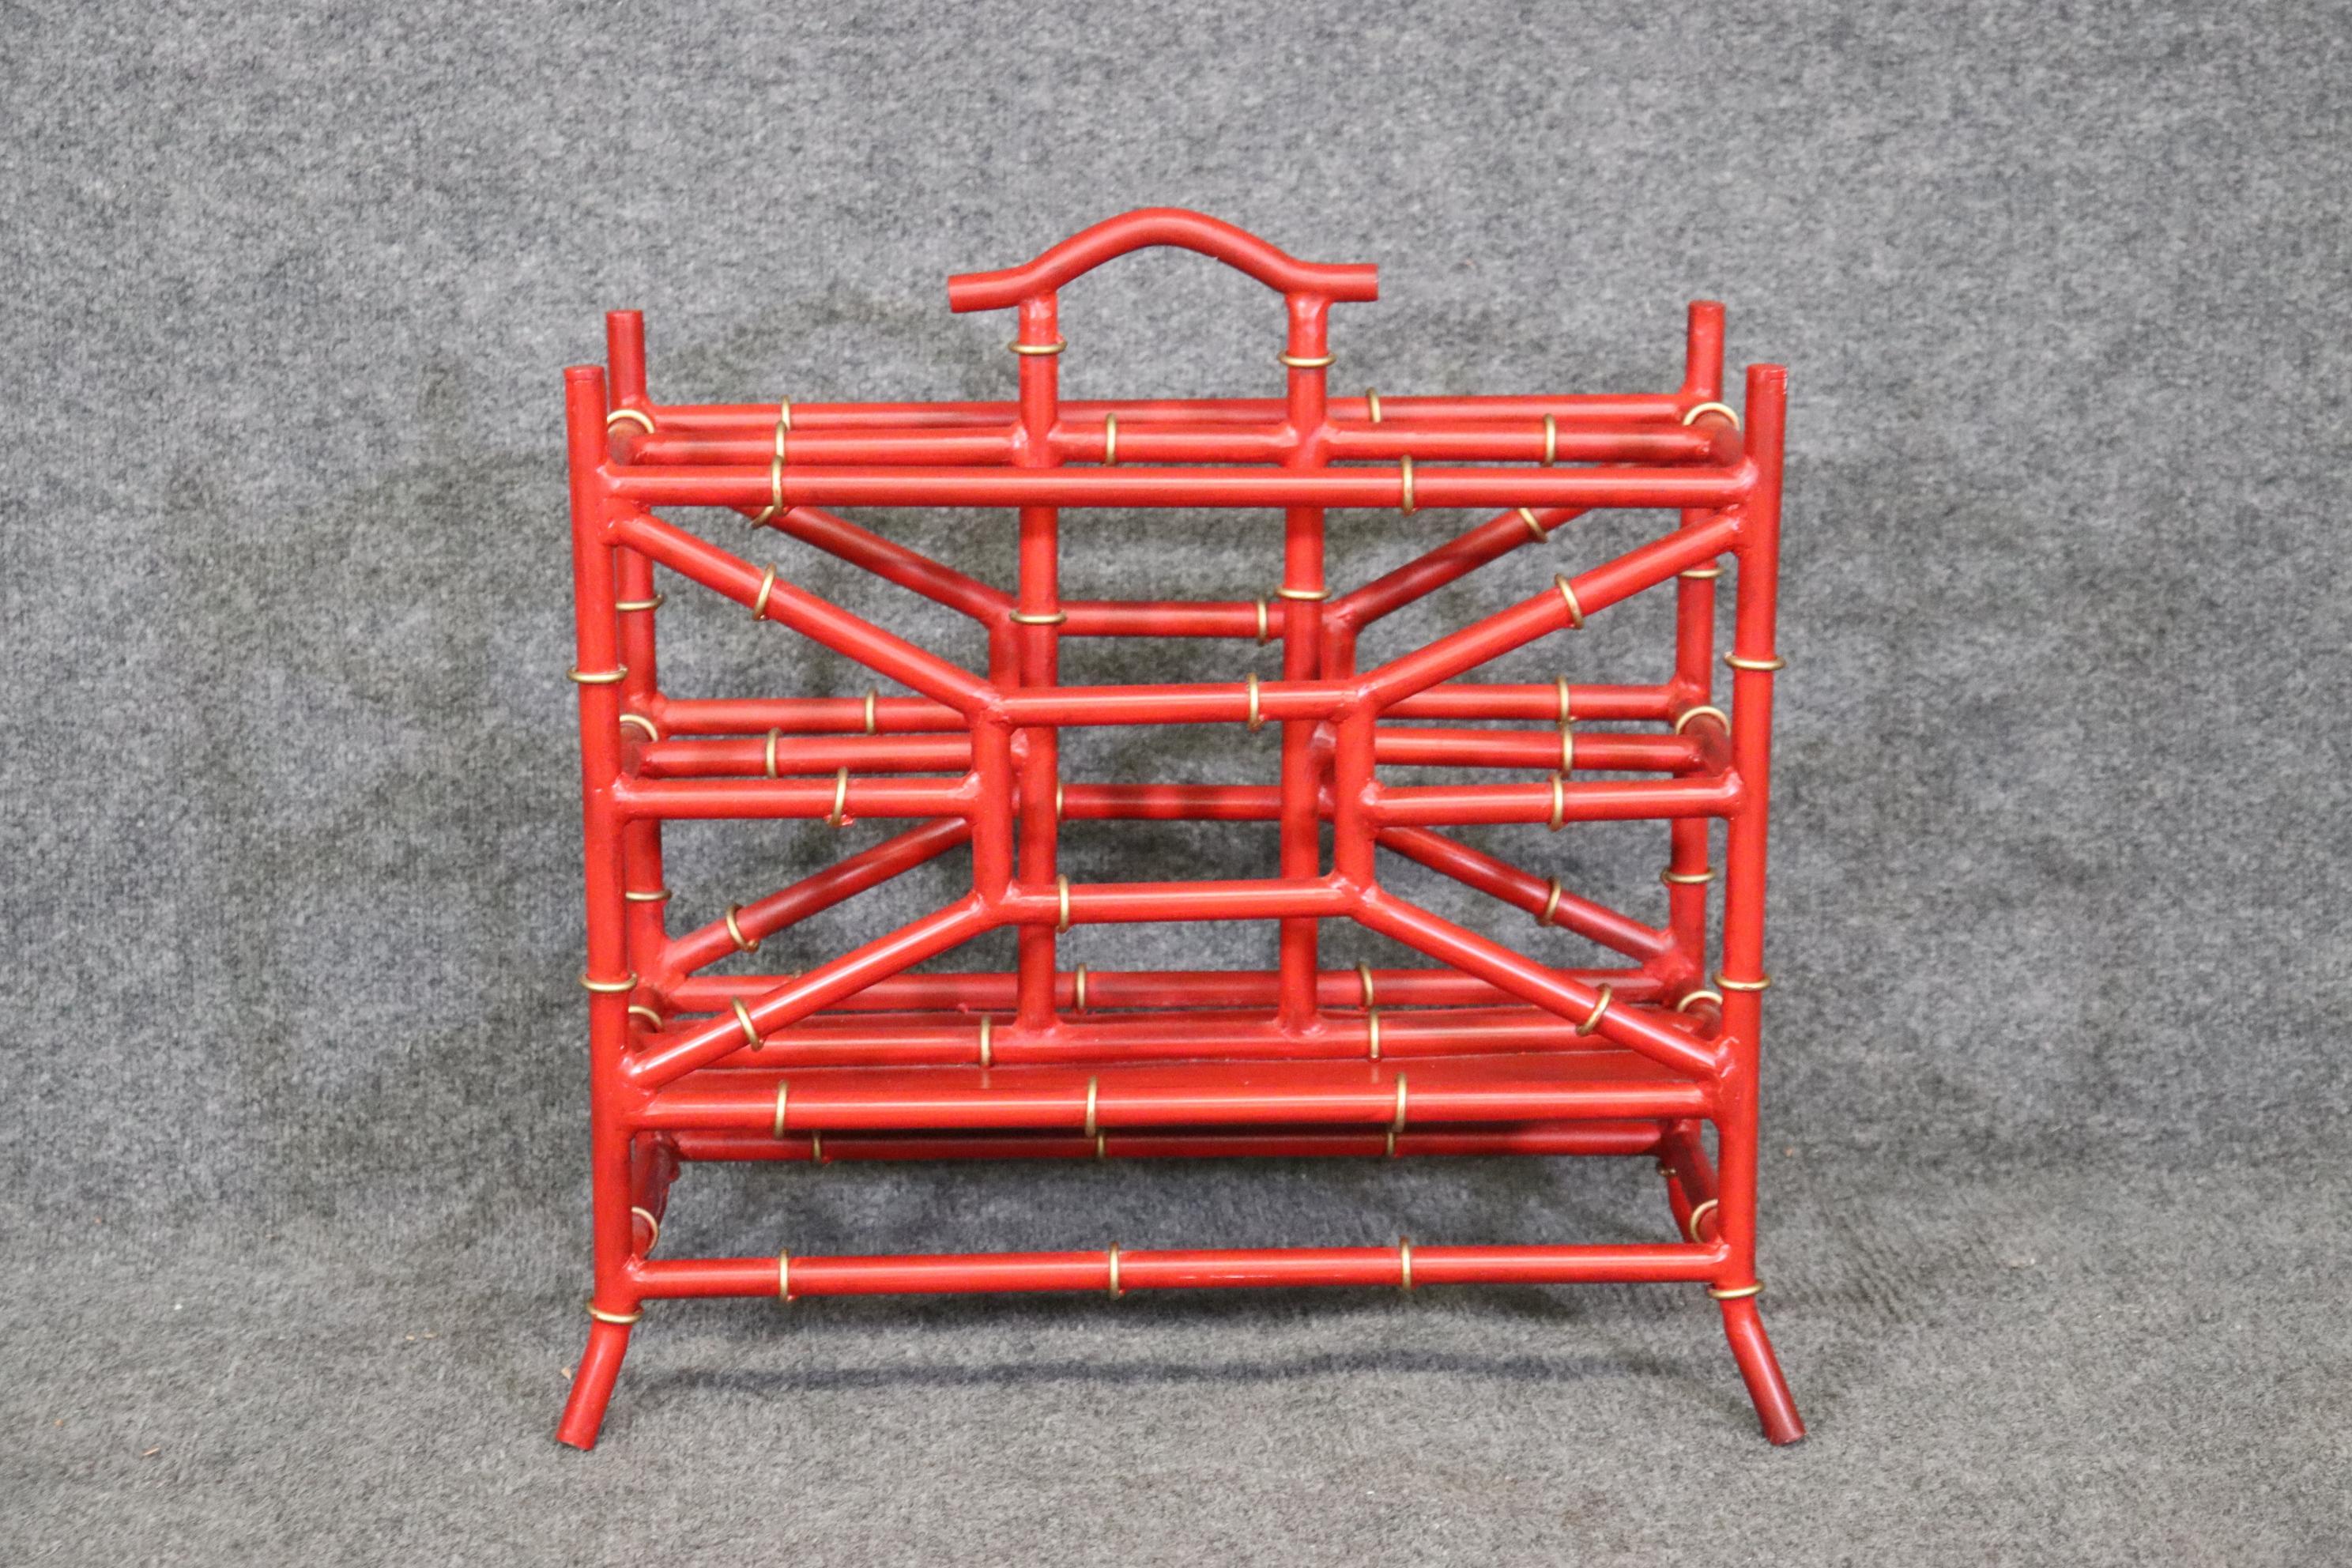 Dimensions- H: 19 3/4in W: 20 1/2in D: 8 1/2in 

This metal faux bamboo red magazine rack in the manner of Maison Bagues, is truly a unique and quality piece! This piece is bound to bring a sense of Minimalistic luxury and modernism into your living